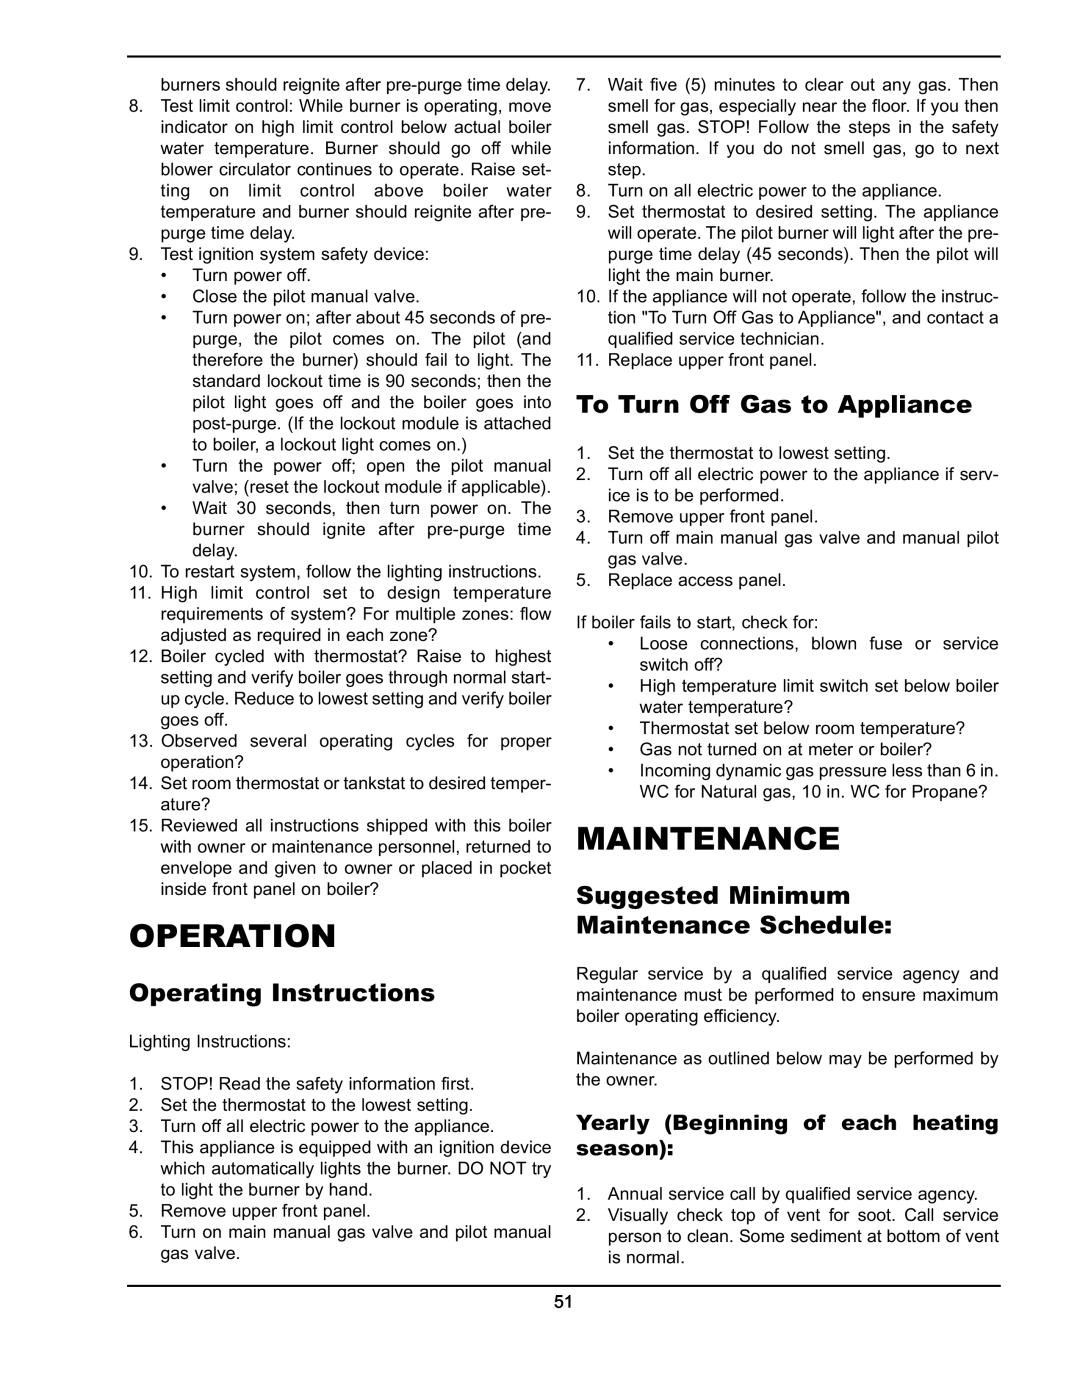 Raypak 751 manual Operation, Maintenance, Operating Instructions, To Turn Off Gas to Appliance 